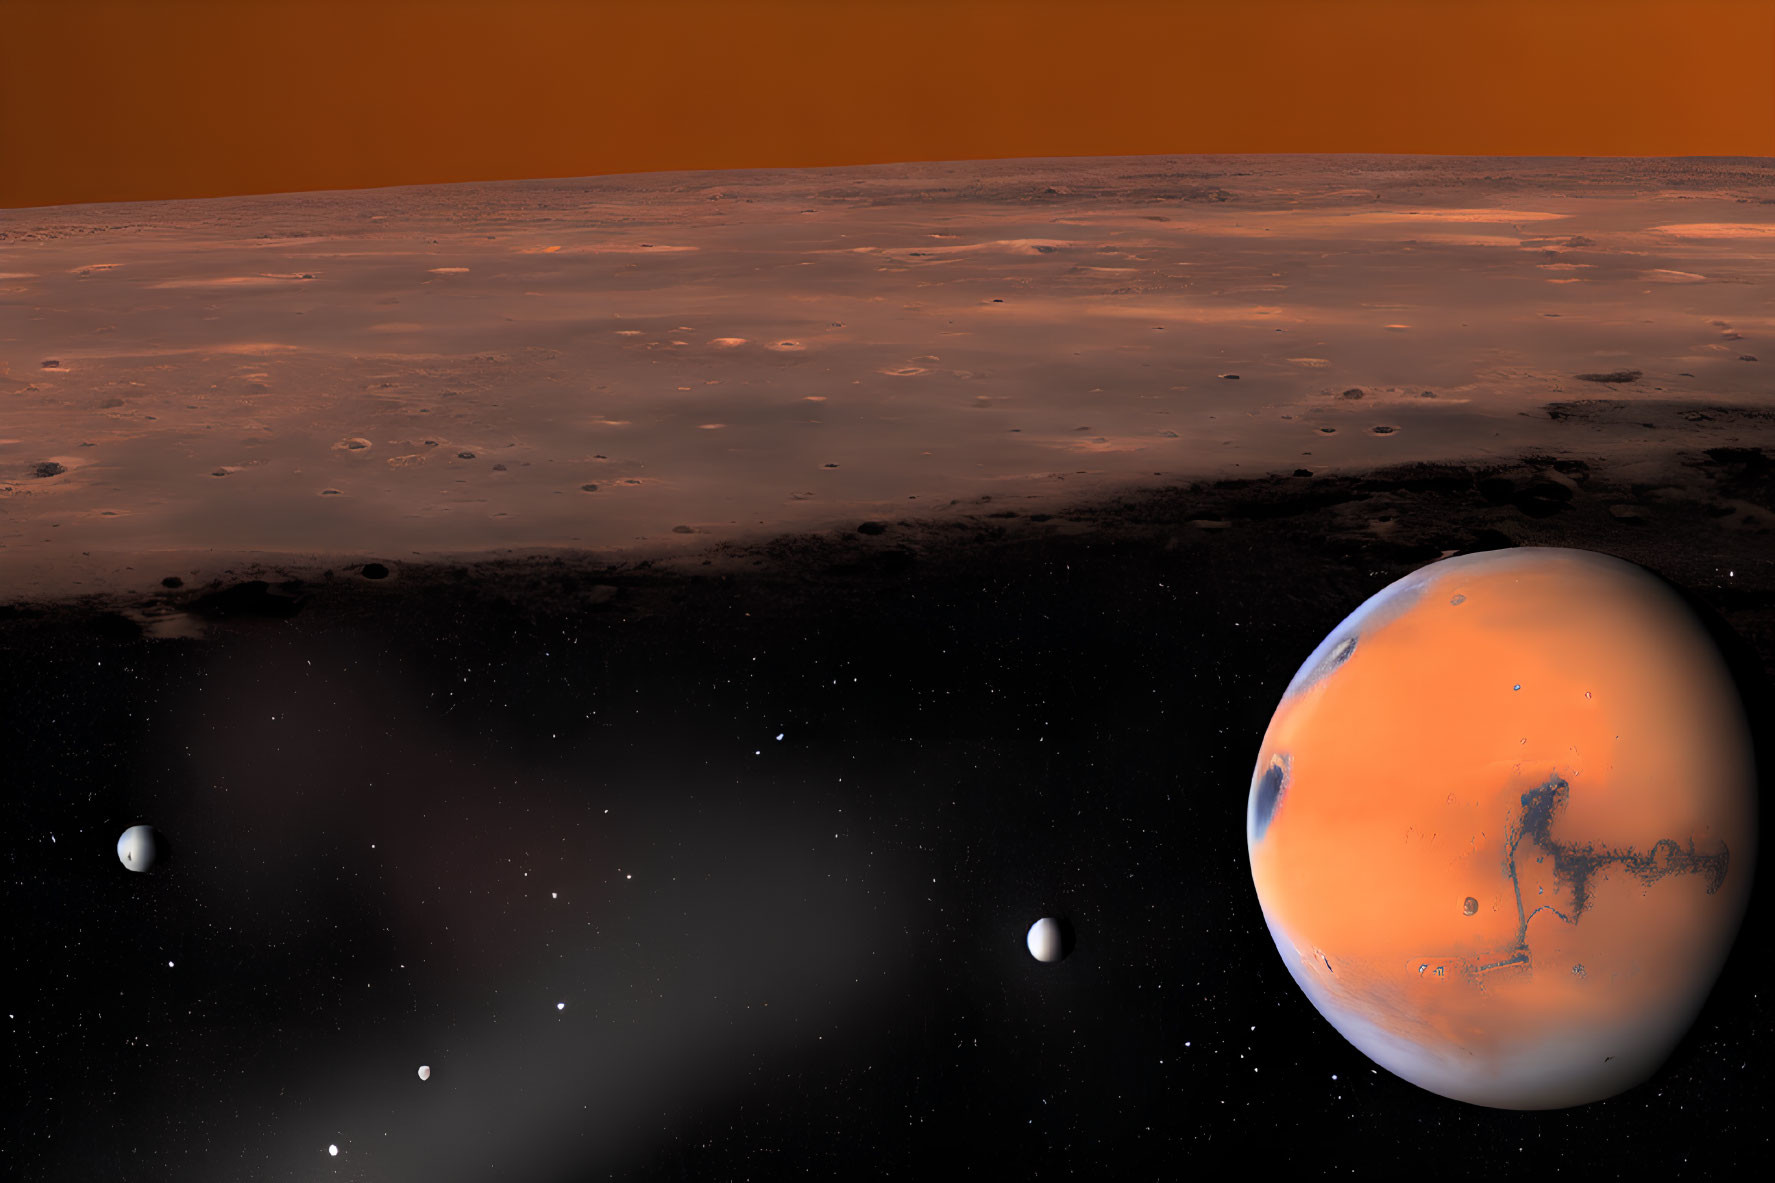 Mars with Phobos and Deimos in starry sky